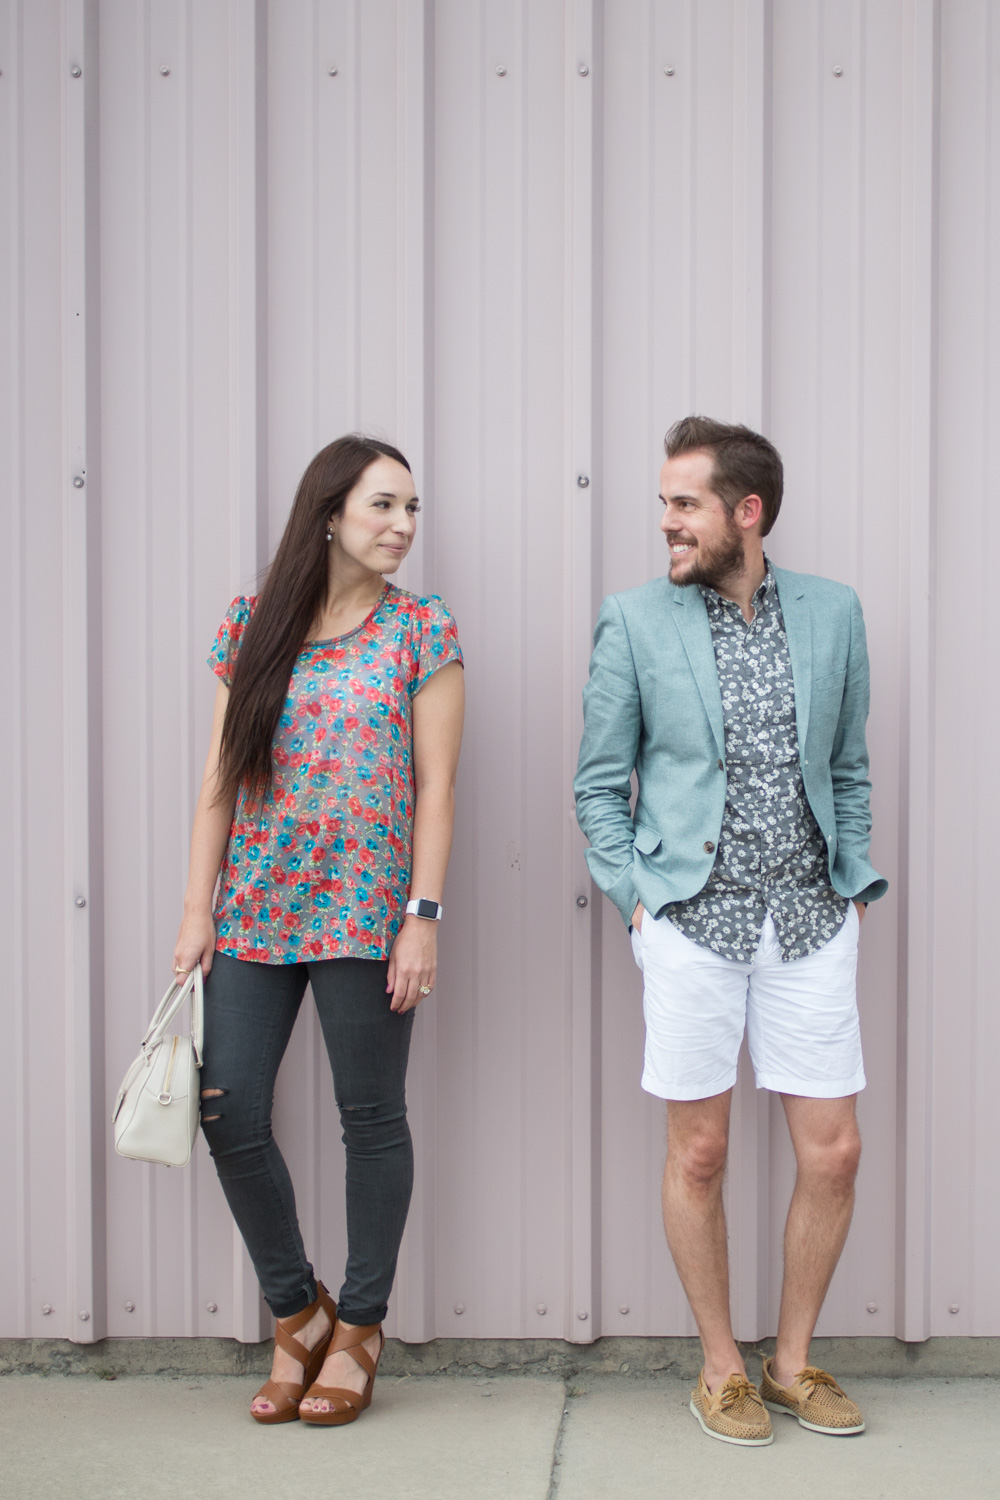 Kelseybang.com- A his and her Style Blog